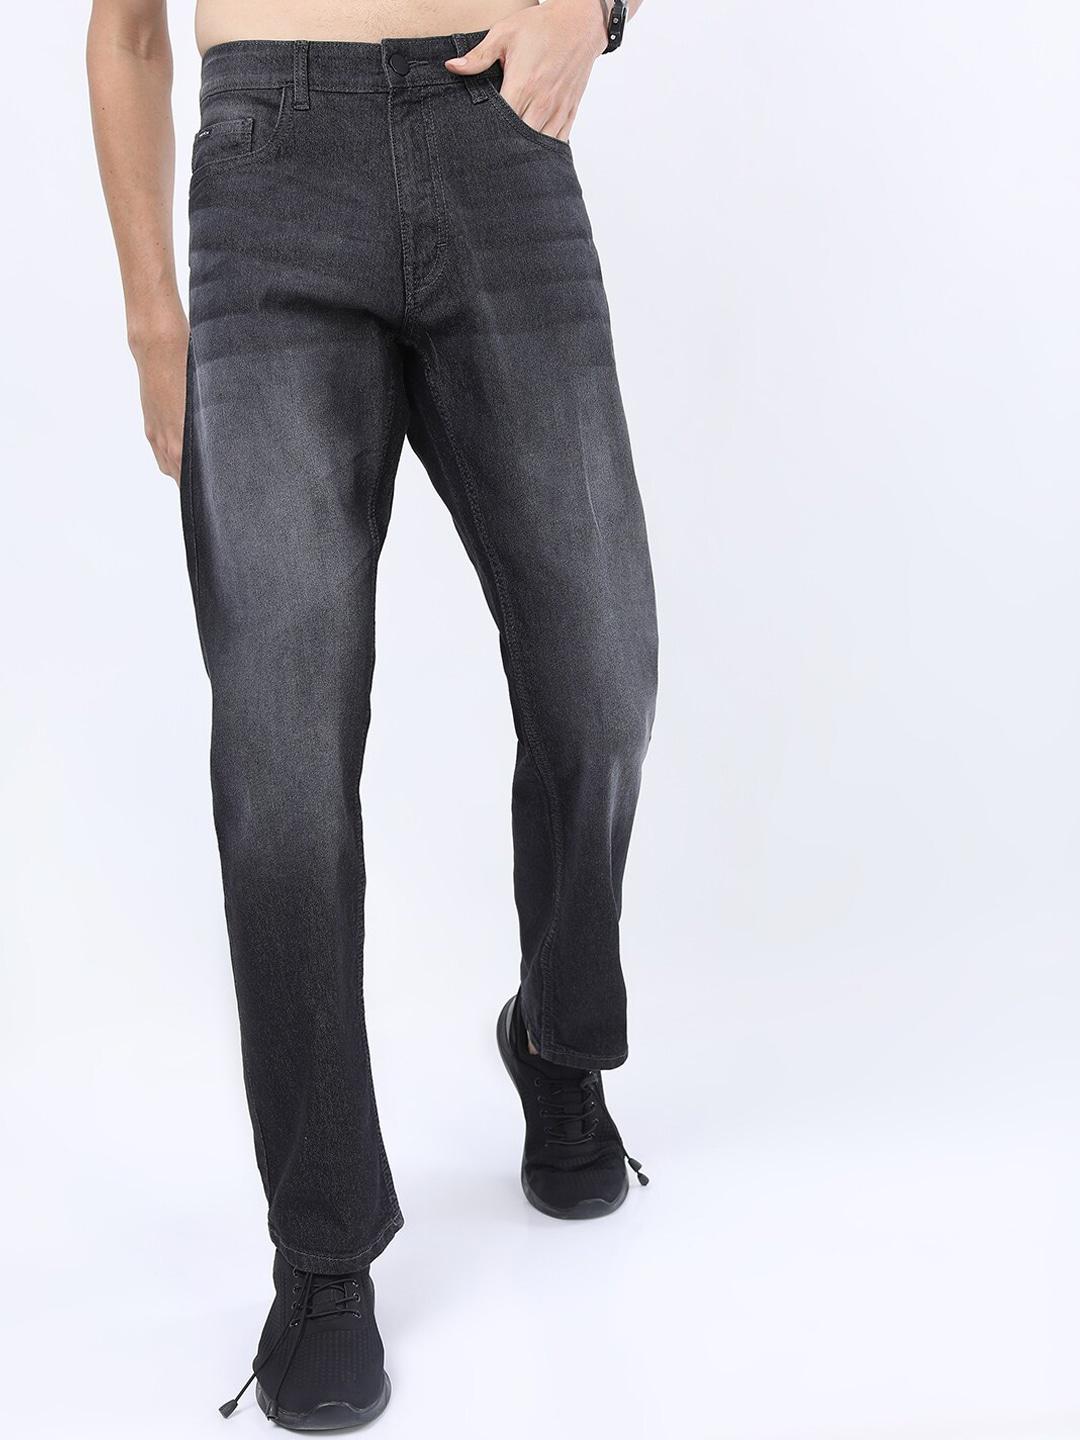 KETCH Men Charcoal Straight Fit Light Fade Stretchable Jeans